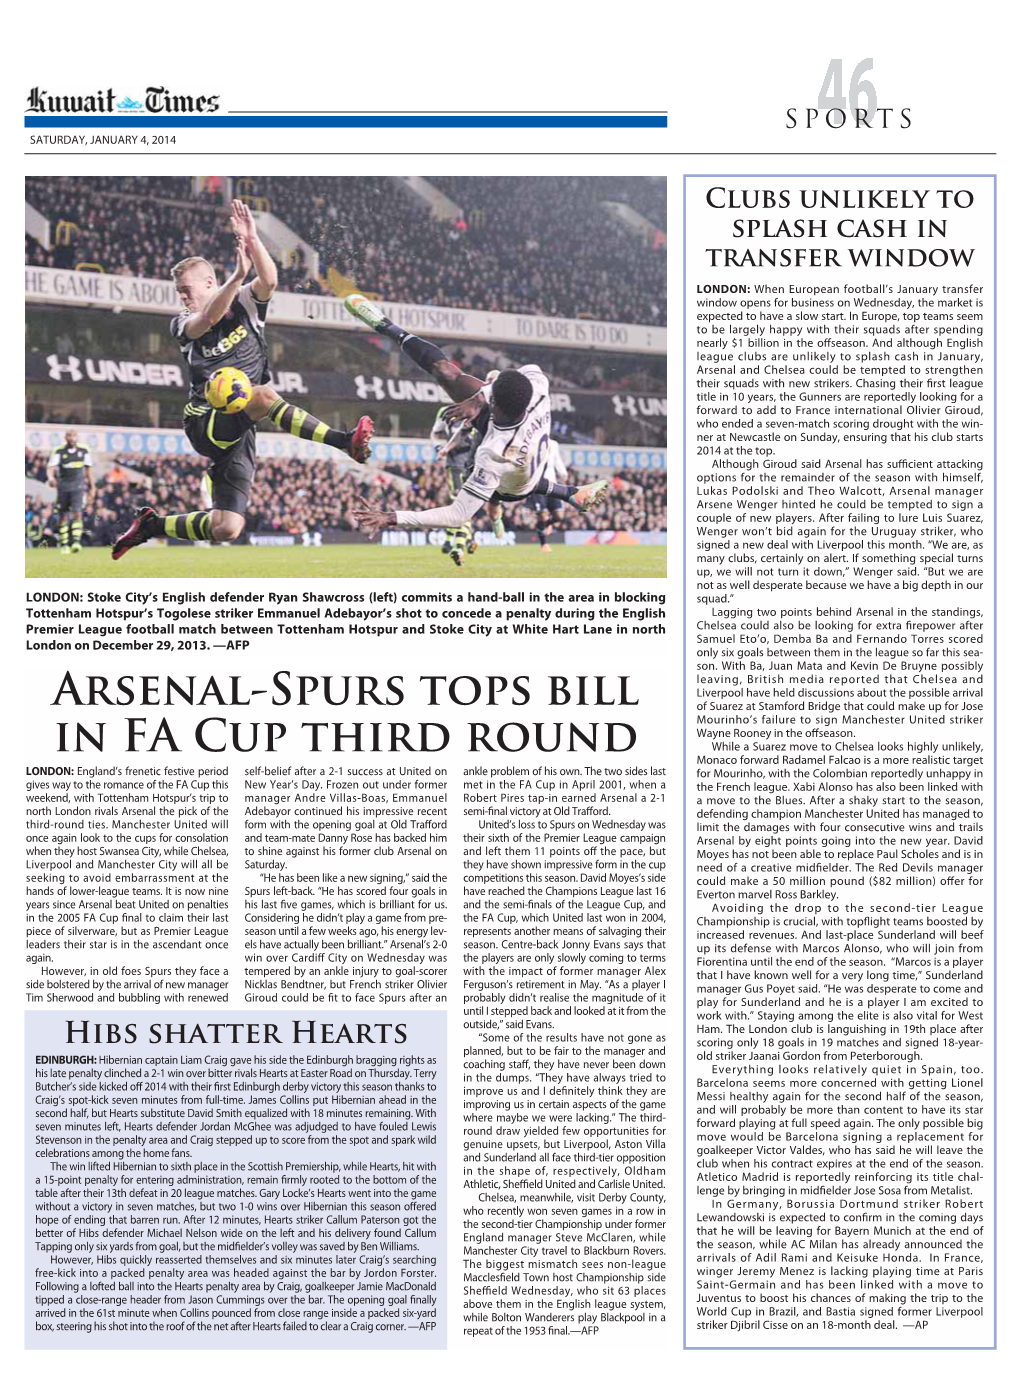 Arsenal-Spurs Tops Bill in FA Cup Third Round